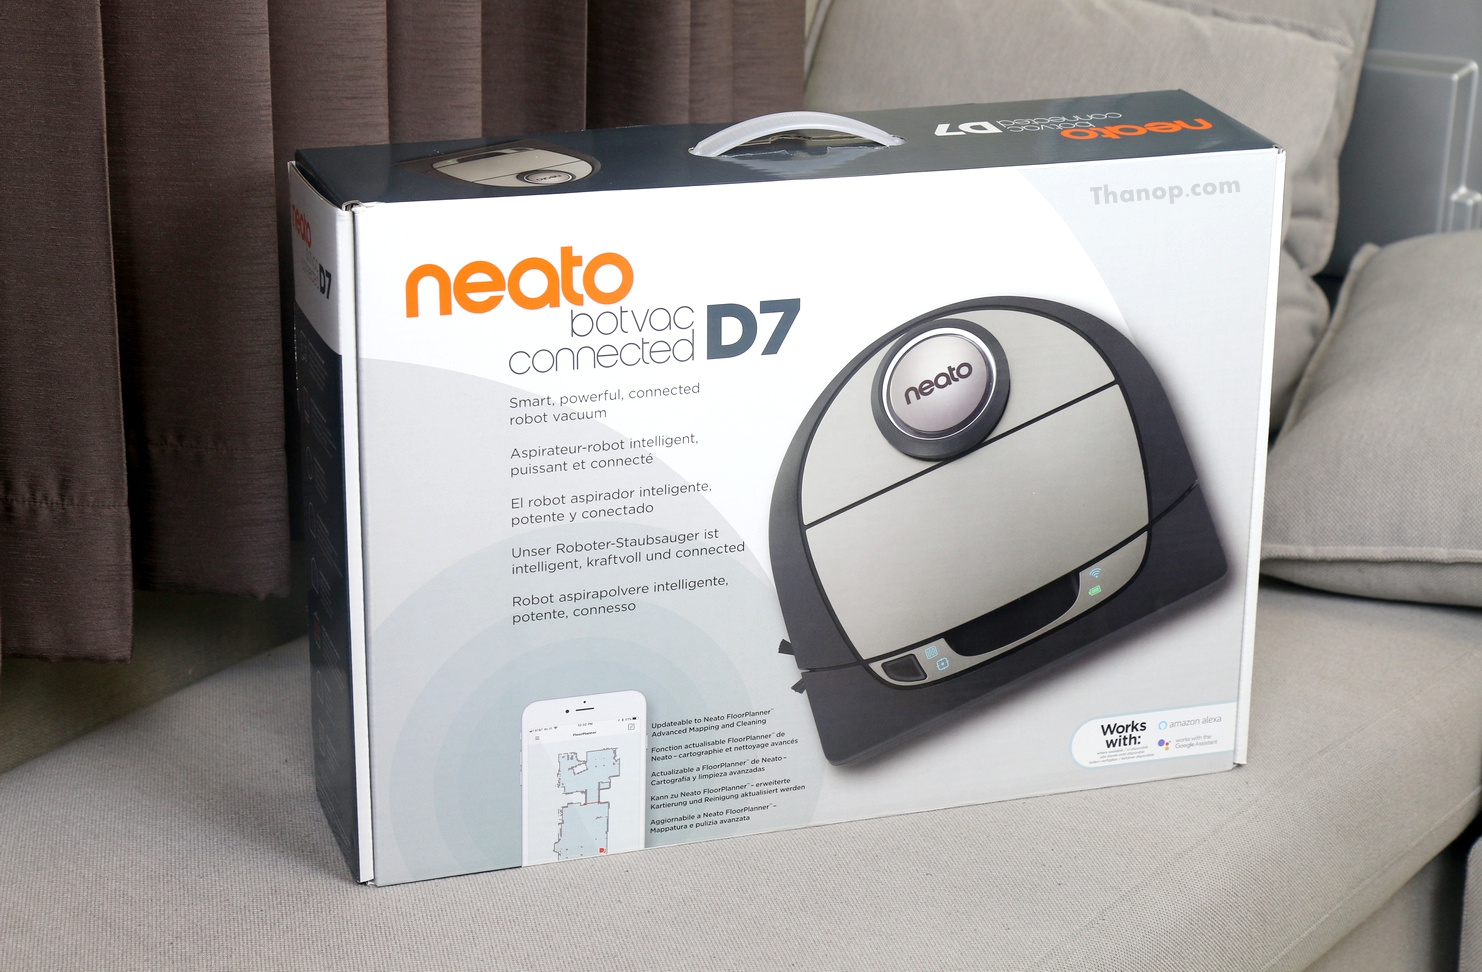 neato-botvac-d7-connected-featured-image